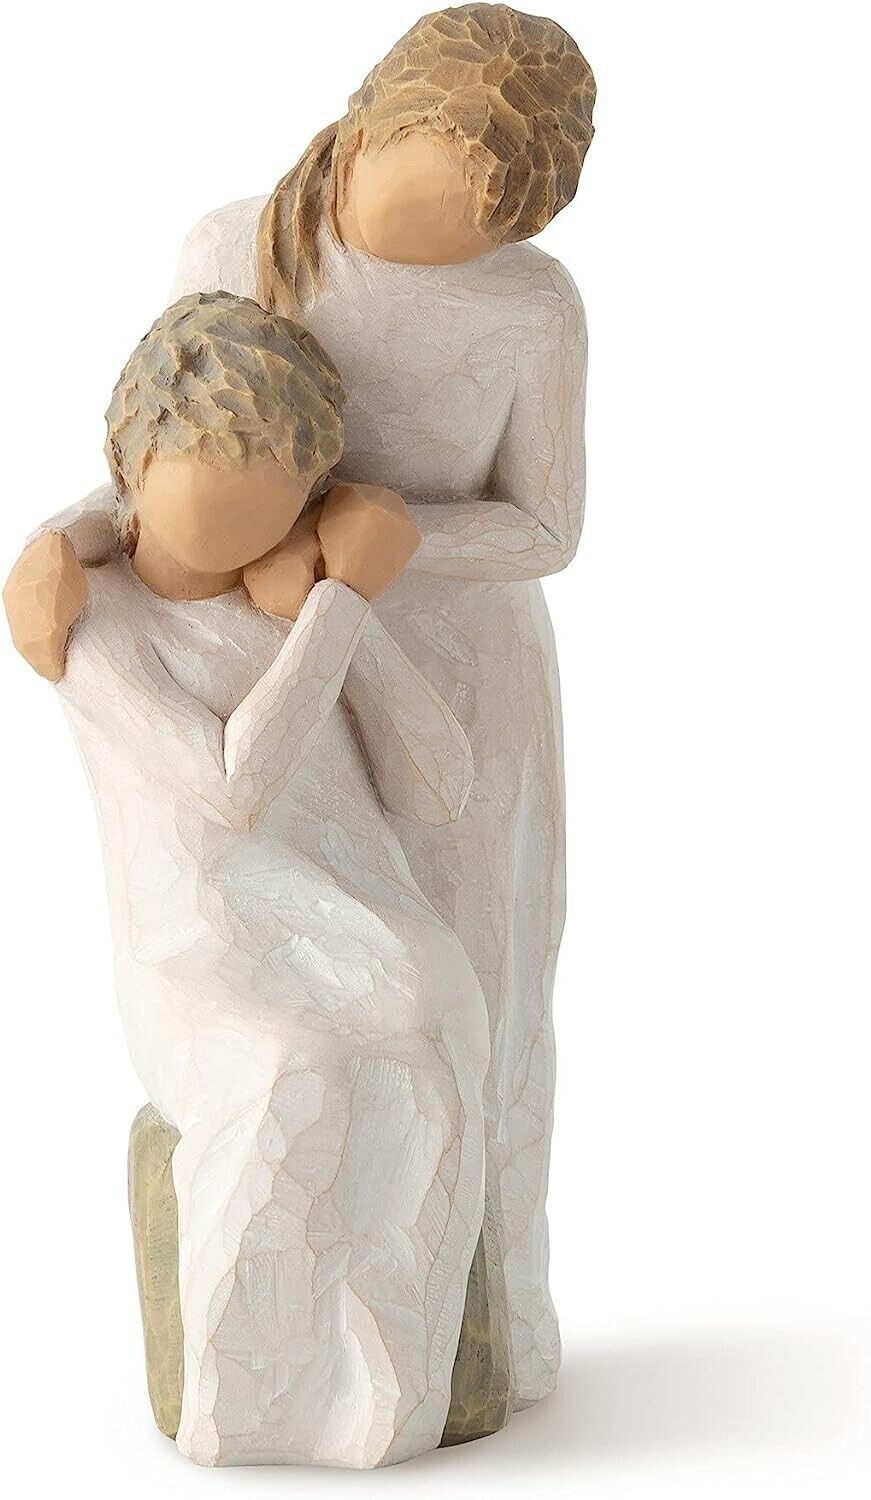 Willow Tree Loving My Mother, Sculpted Hand-Painted Figure